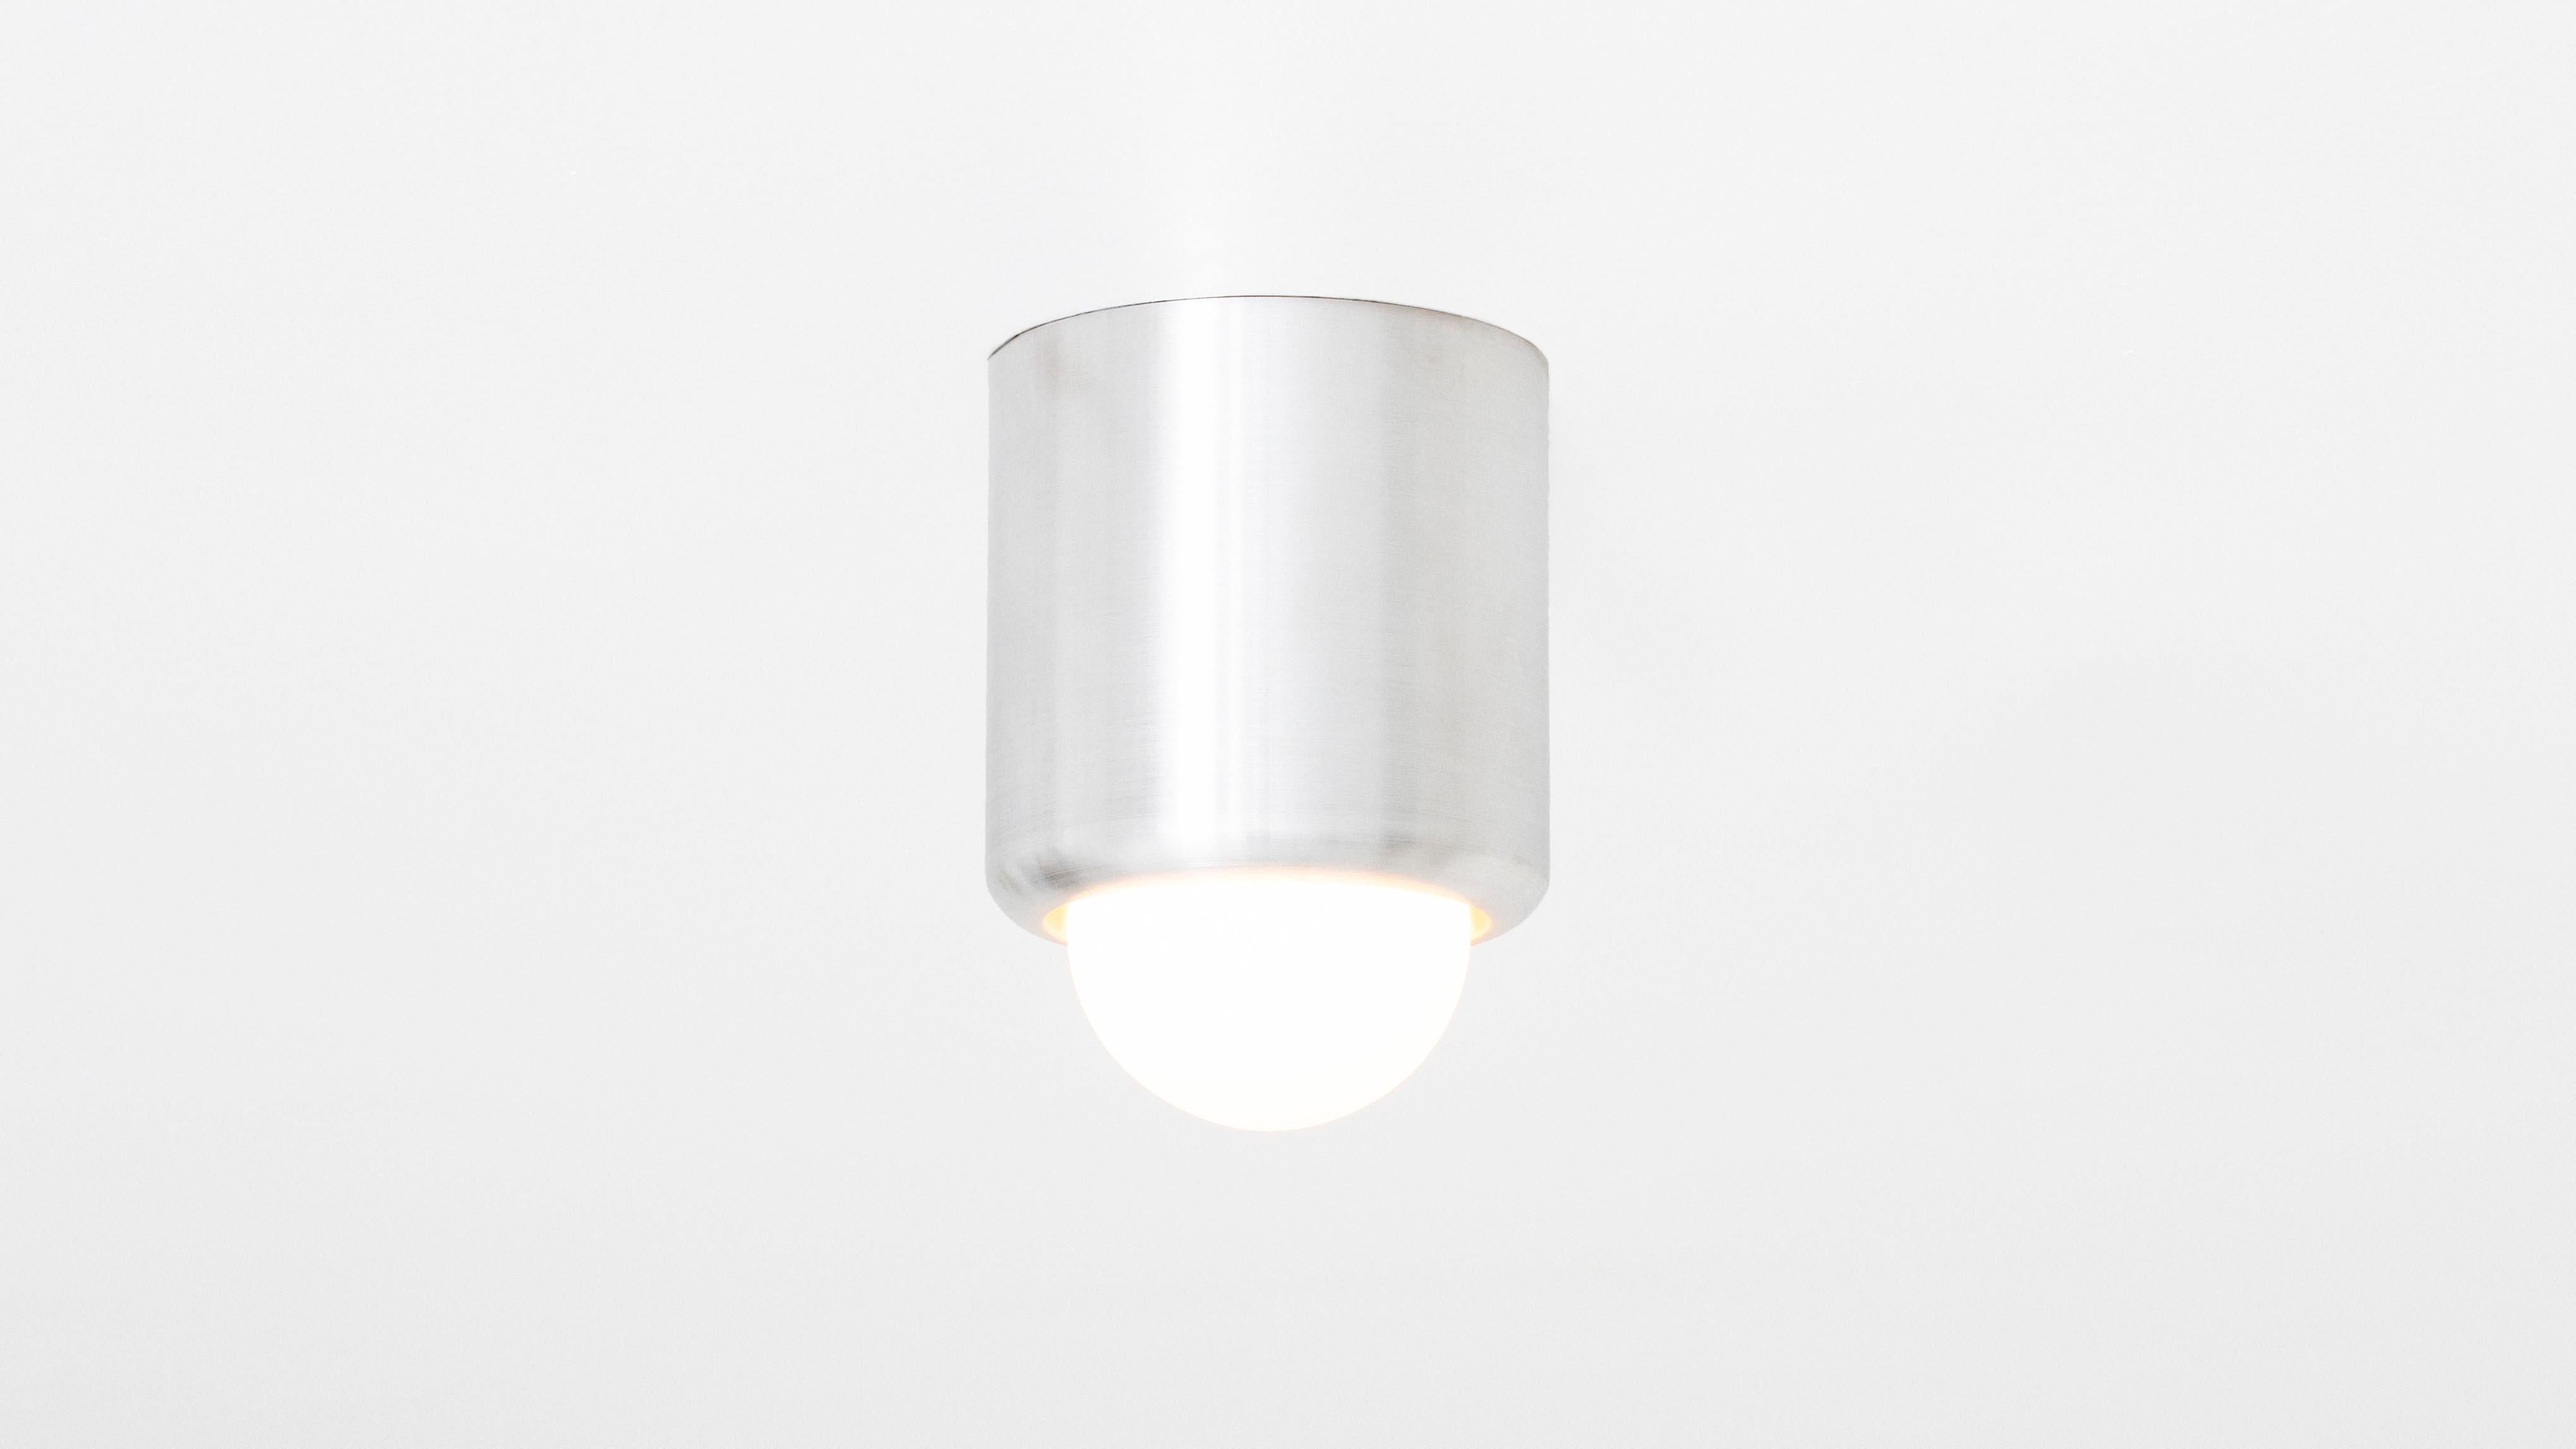 The PARK IV references porcelain fixtures of the pre-war period with its gently arched base curving lyrically into a hand blown matte porcelain bulb. The most elemental of the PARK collection, the sleek fixture works equally well on ceilings and